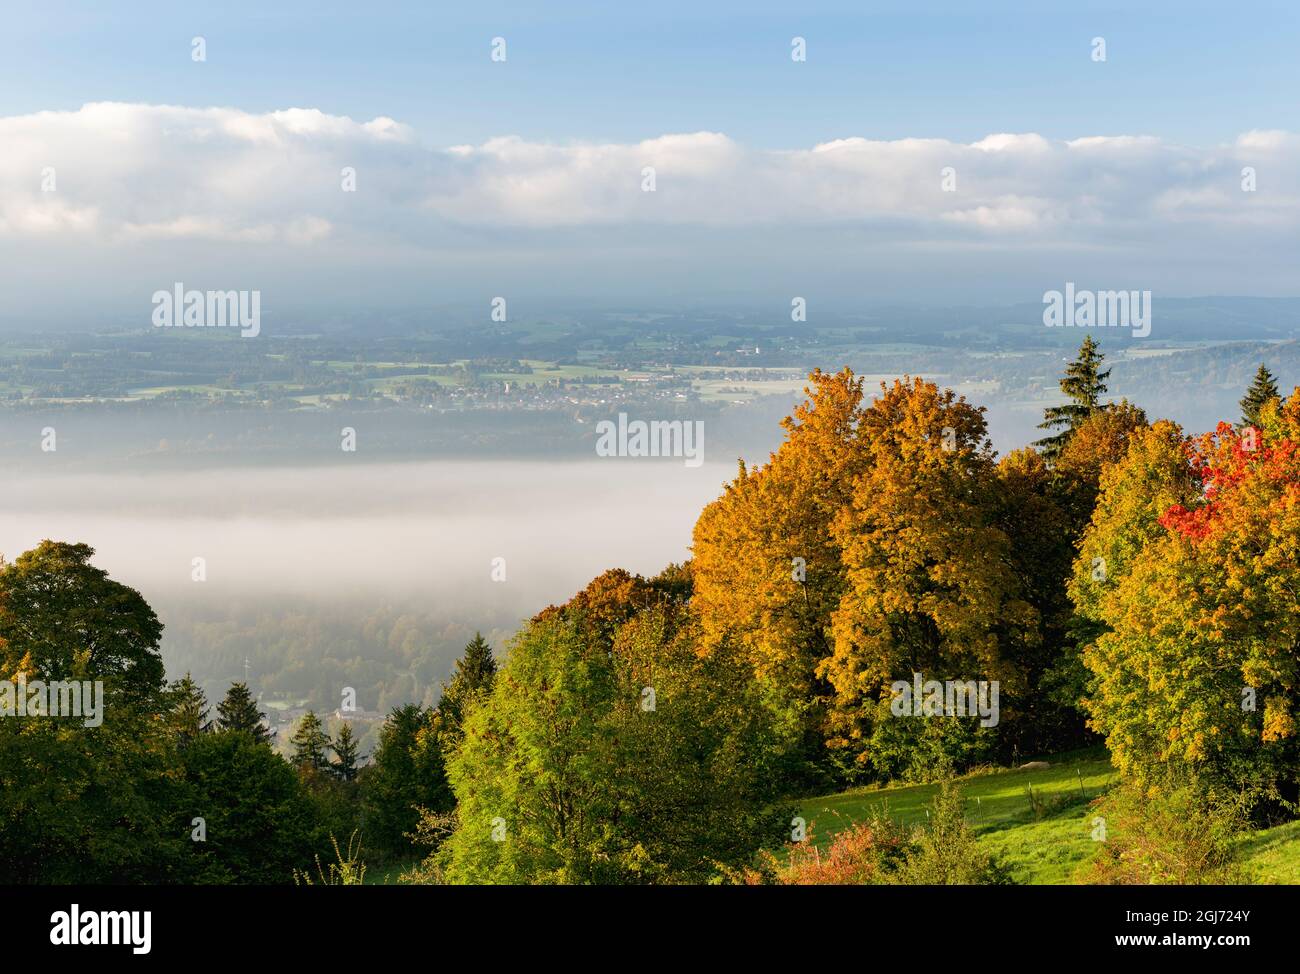 Landscape at Mt. Hoher Peissenberg during sunrise, the view towards the Alps, Wetterstein Mountain Range. Mt. Hoher Peissenberg is located in the foot Stock Photo